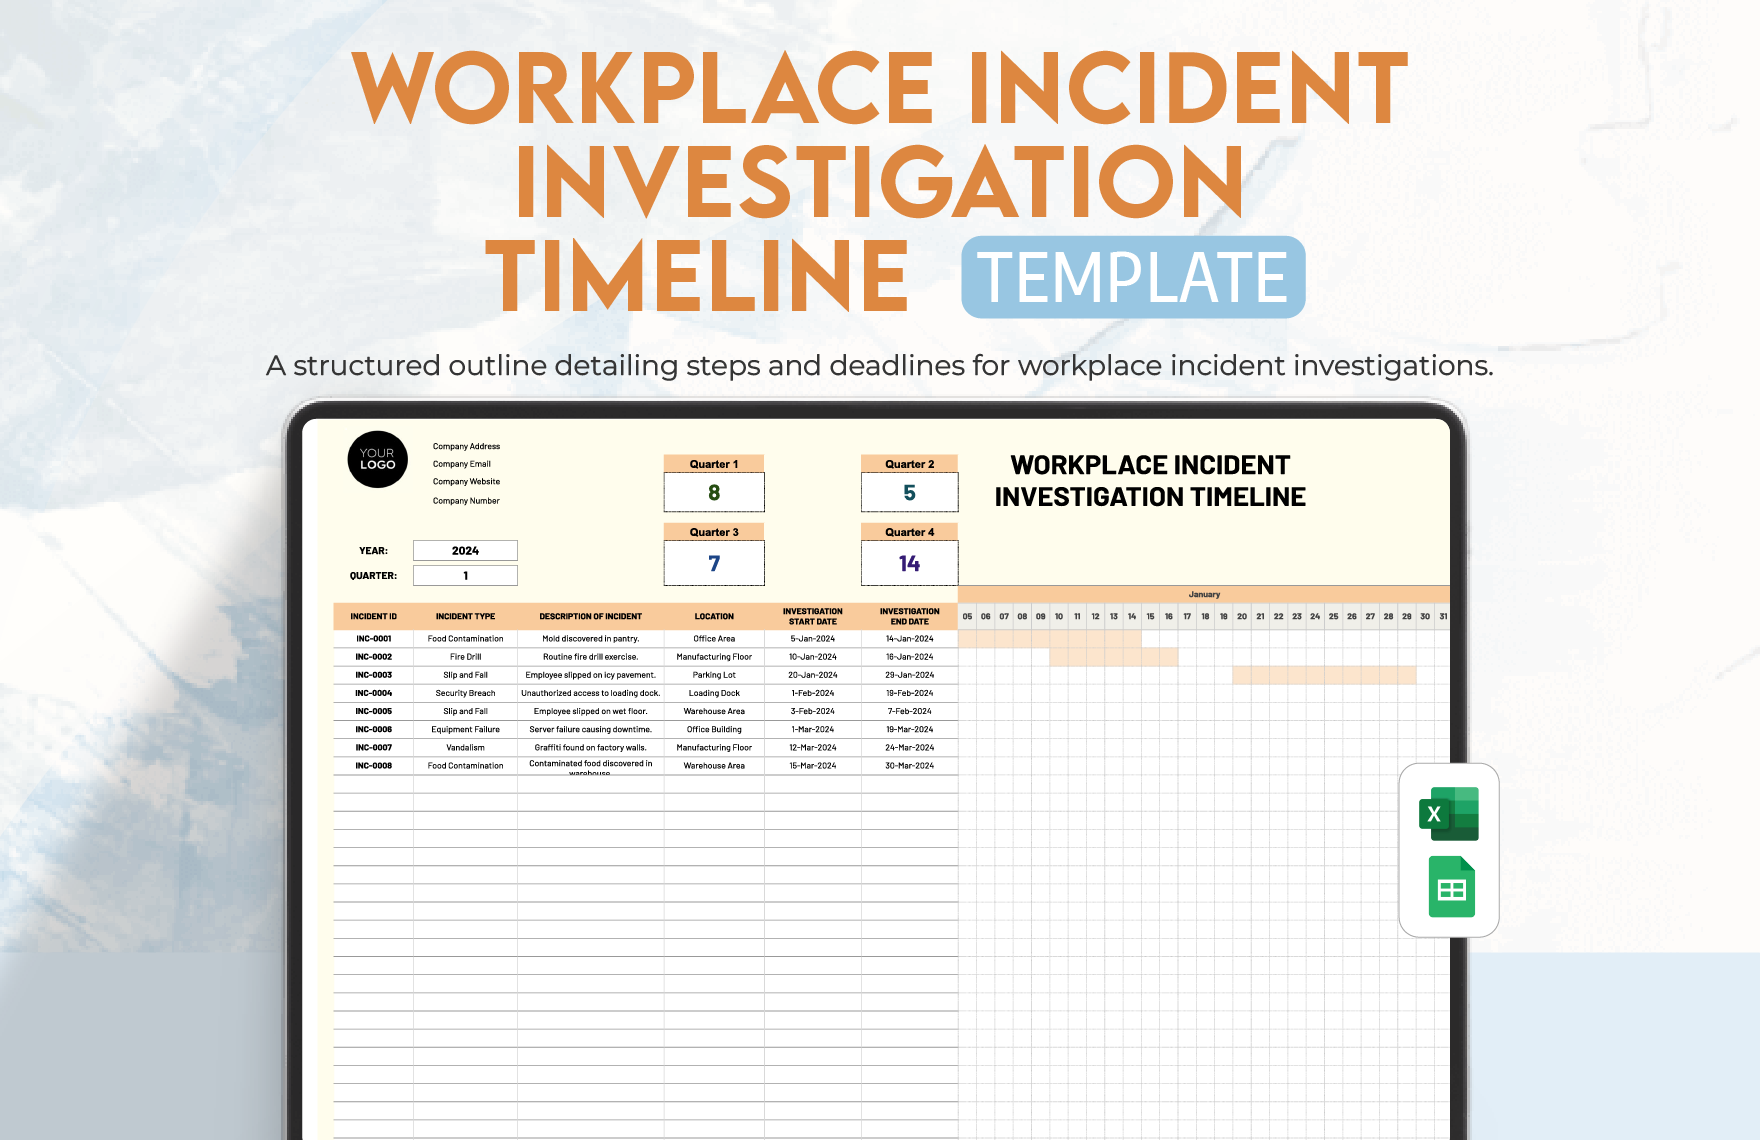 Workplace Incident Investigation Timeline Template in Excel, Google Sheets